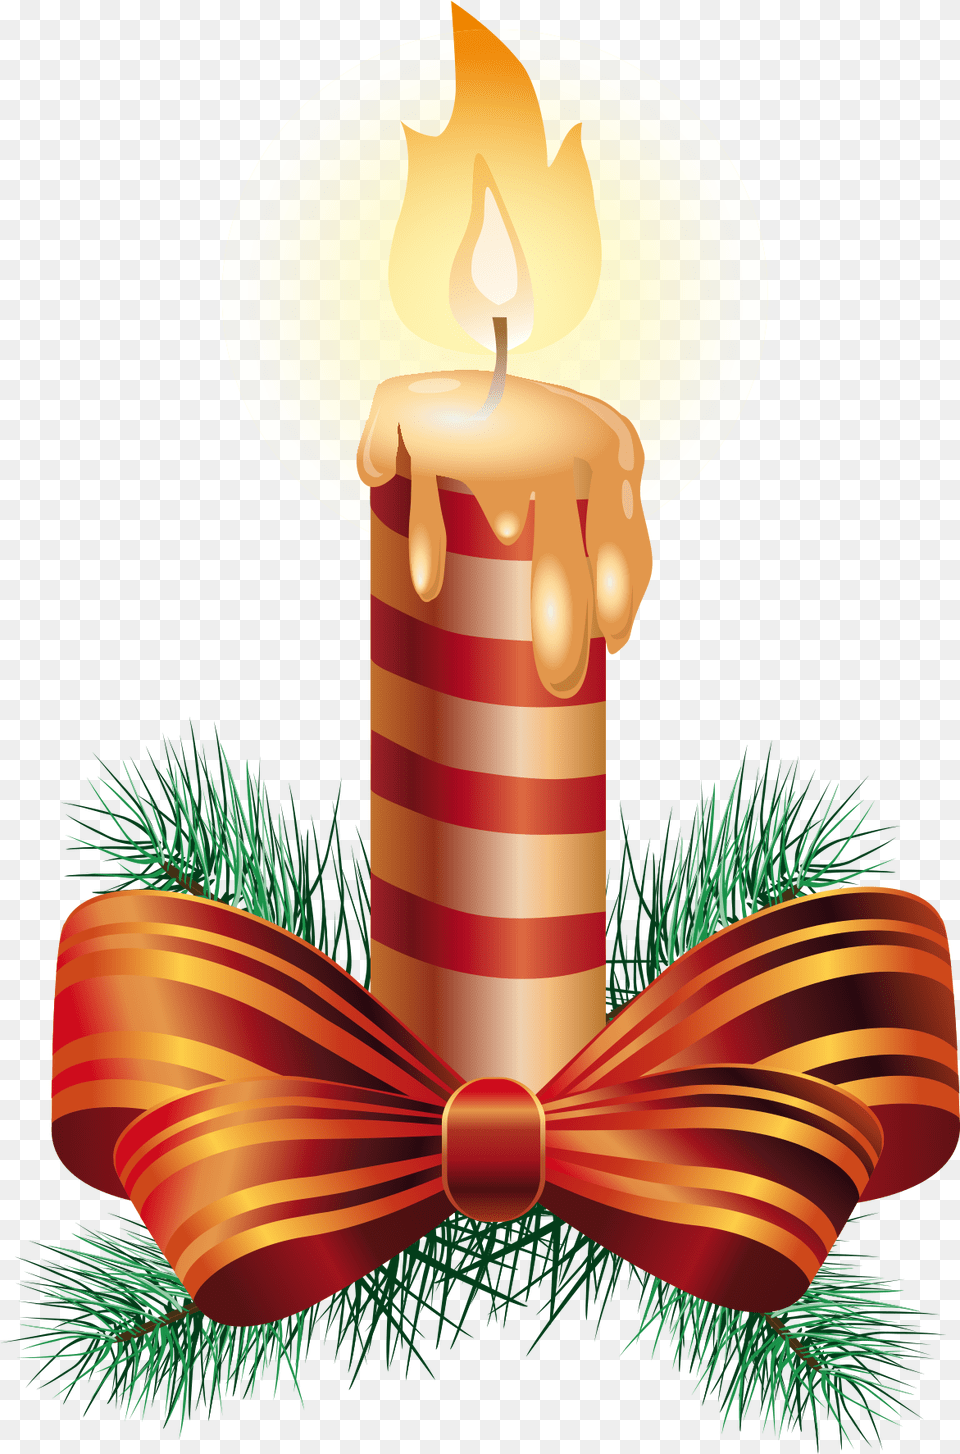 Download Candle Vector Ornament Red Ribbon And Candle, Dynamite, Weapon Png